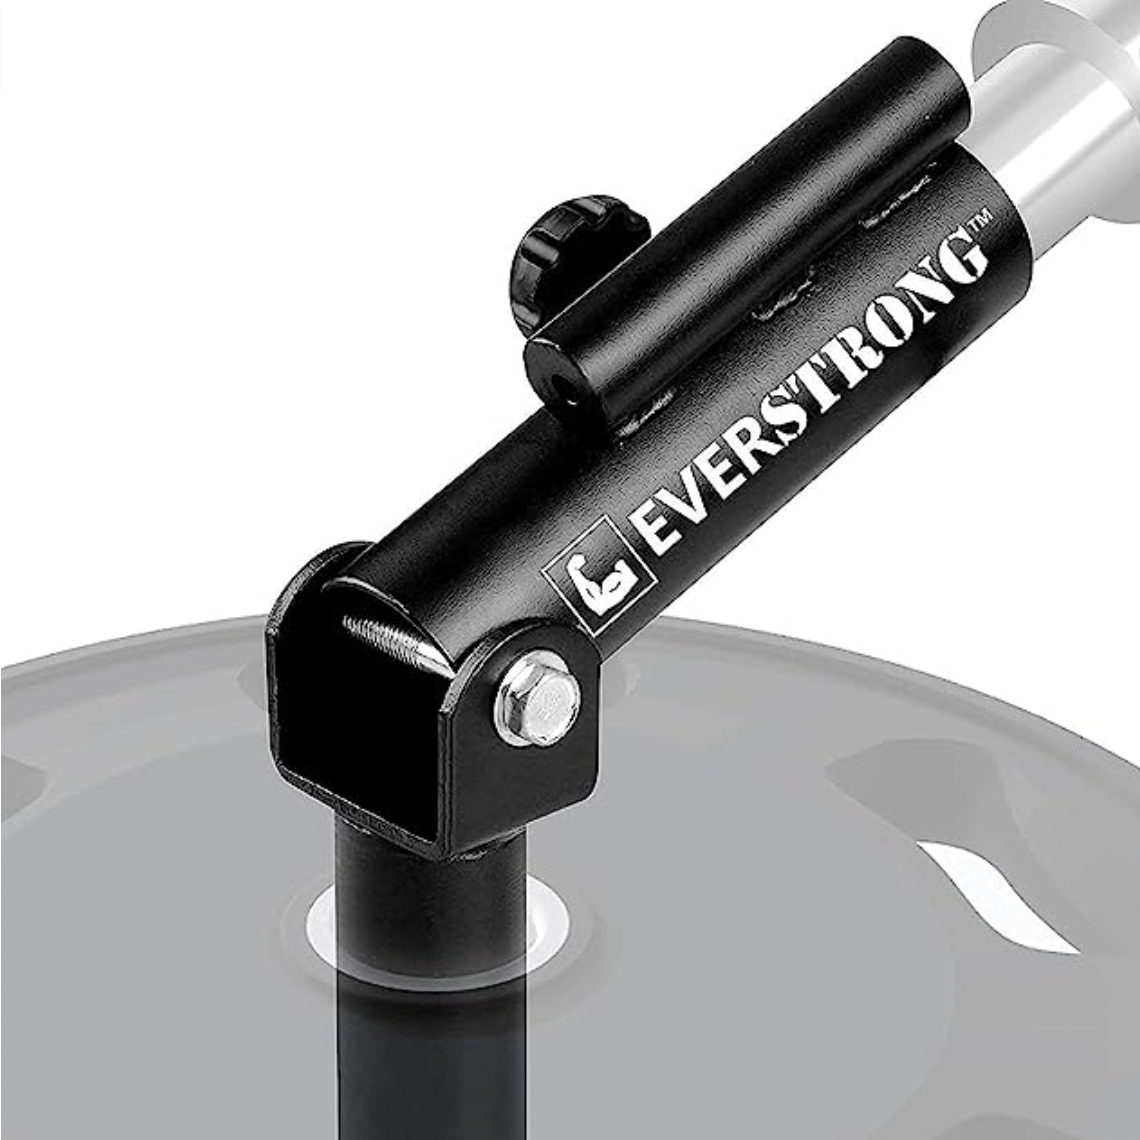 EVERSTRONG T Bar Row 1 inch and 2 inch - Landmine Base